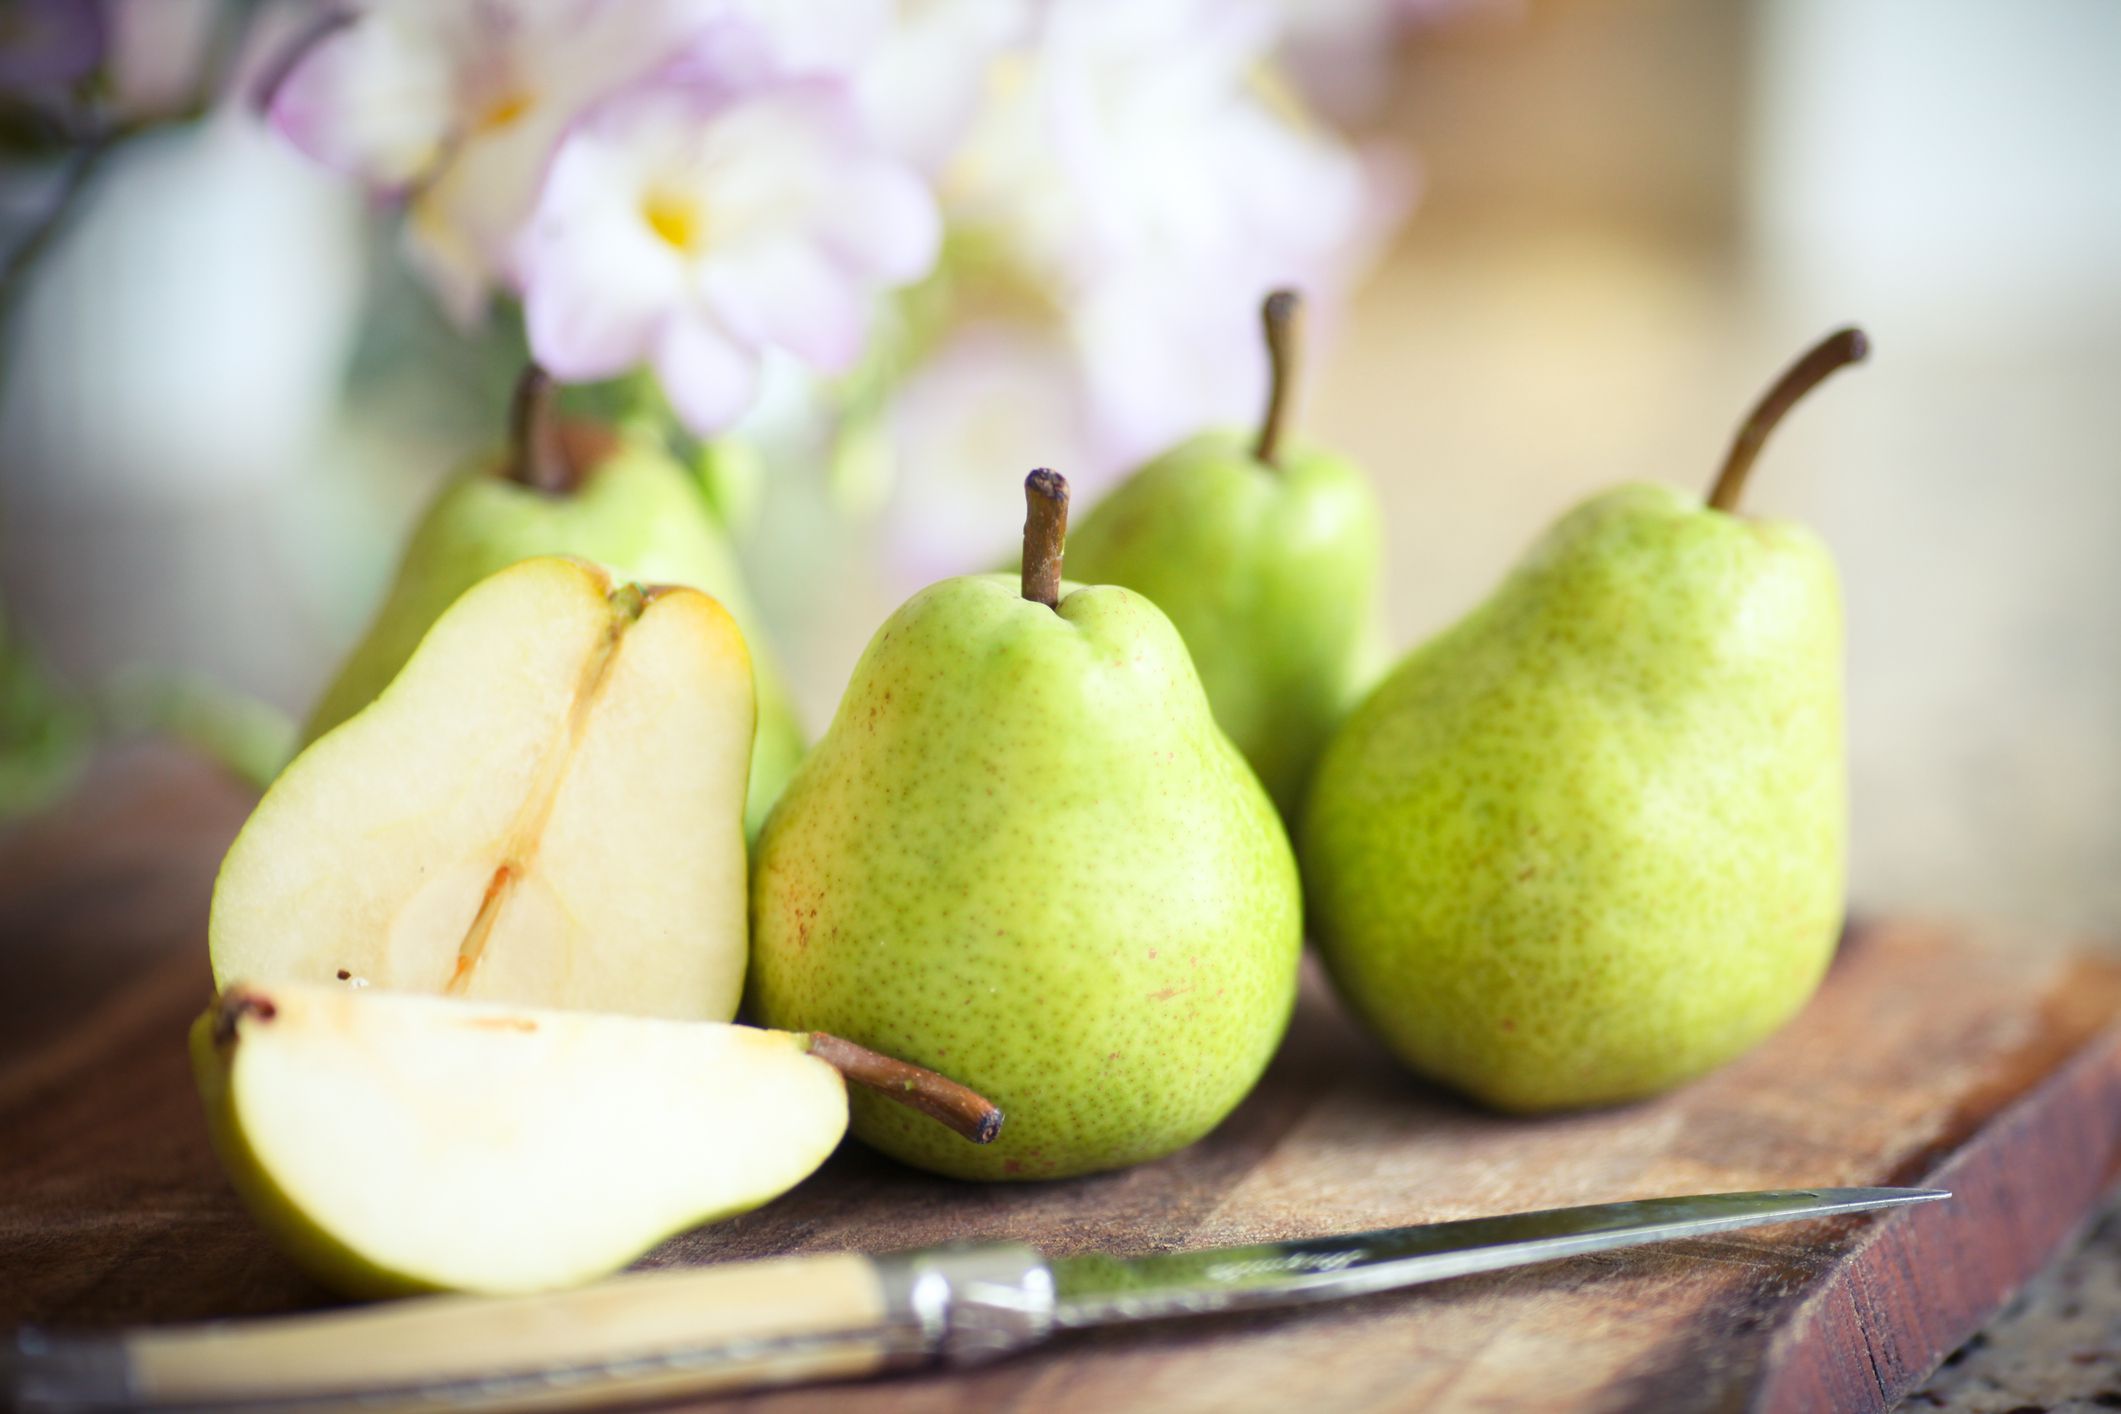 Pear Hair And Beauty Benefits For Women | FabWoman